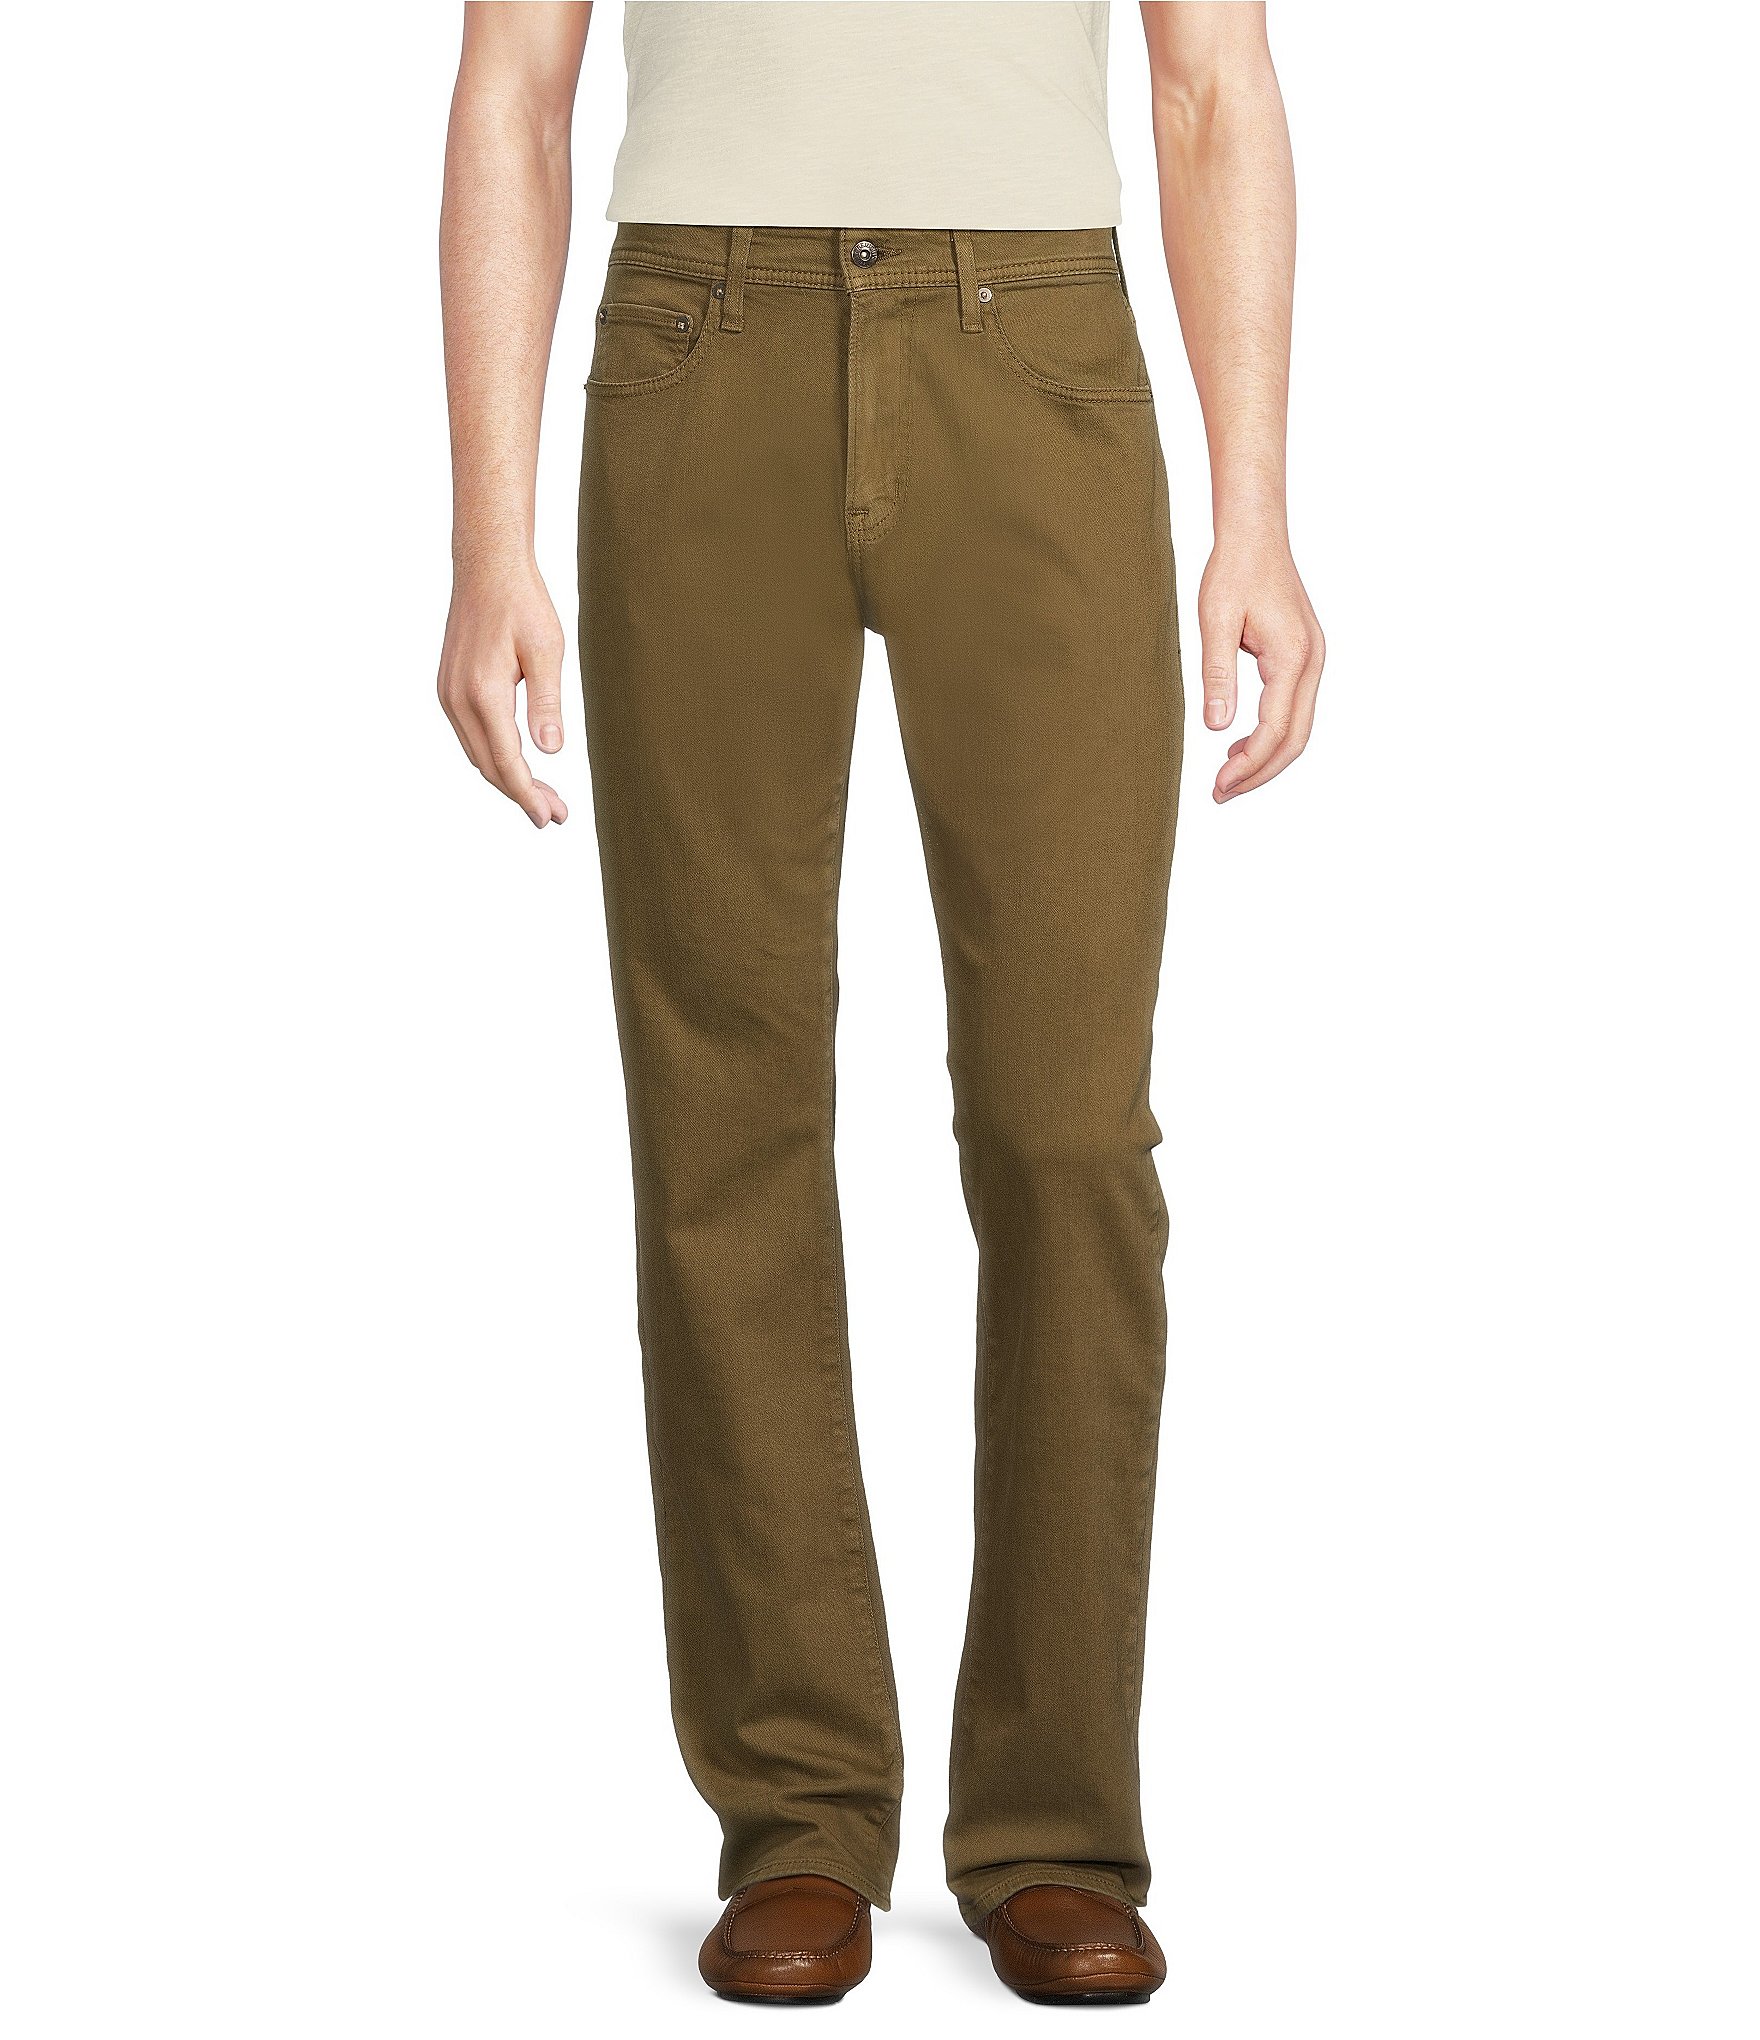 Cremieux Jeans Relaxed Straight Fit Stretch Jeans | Dillard's